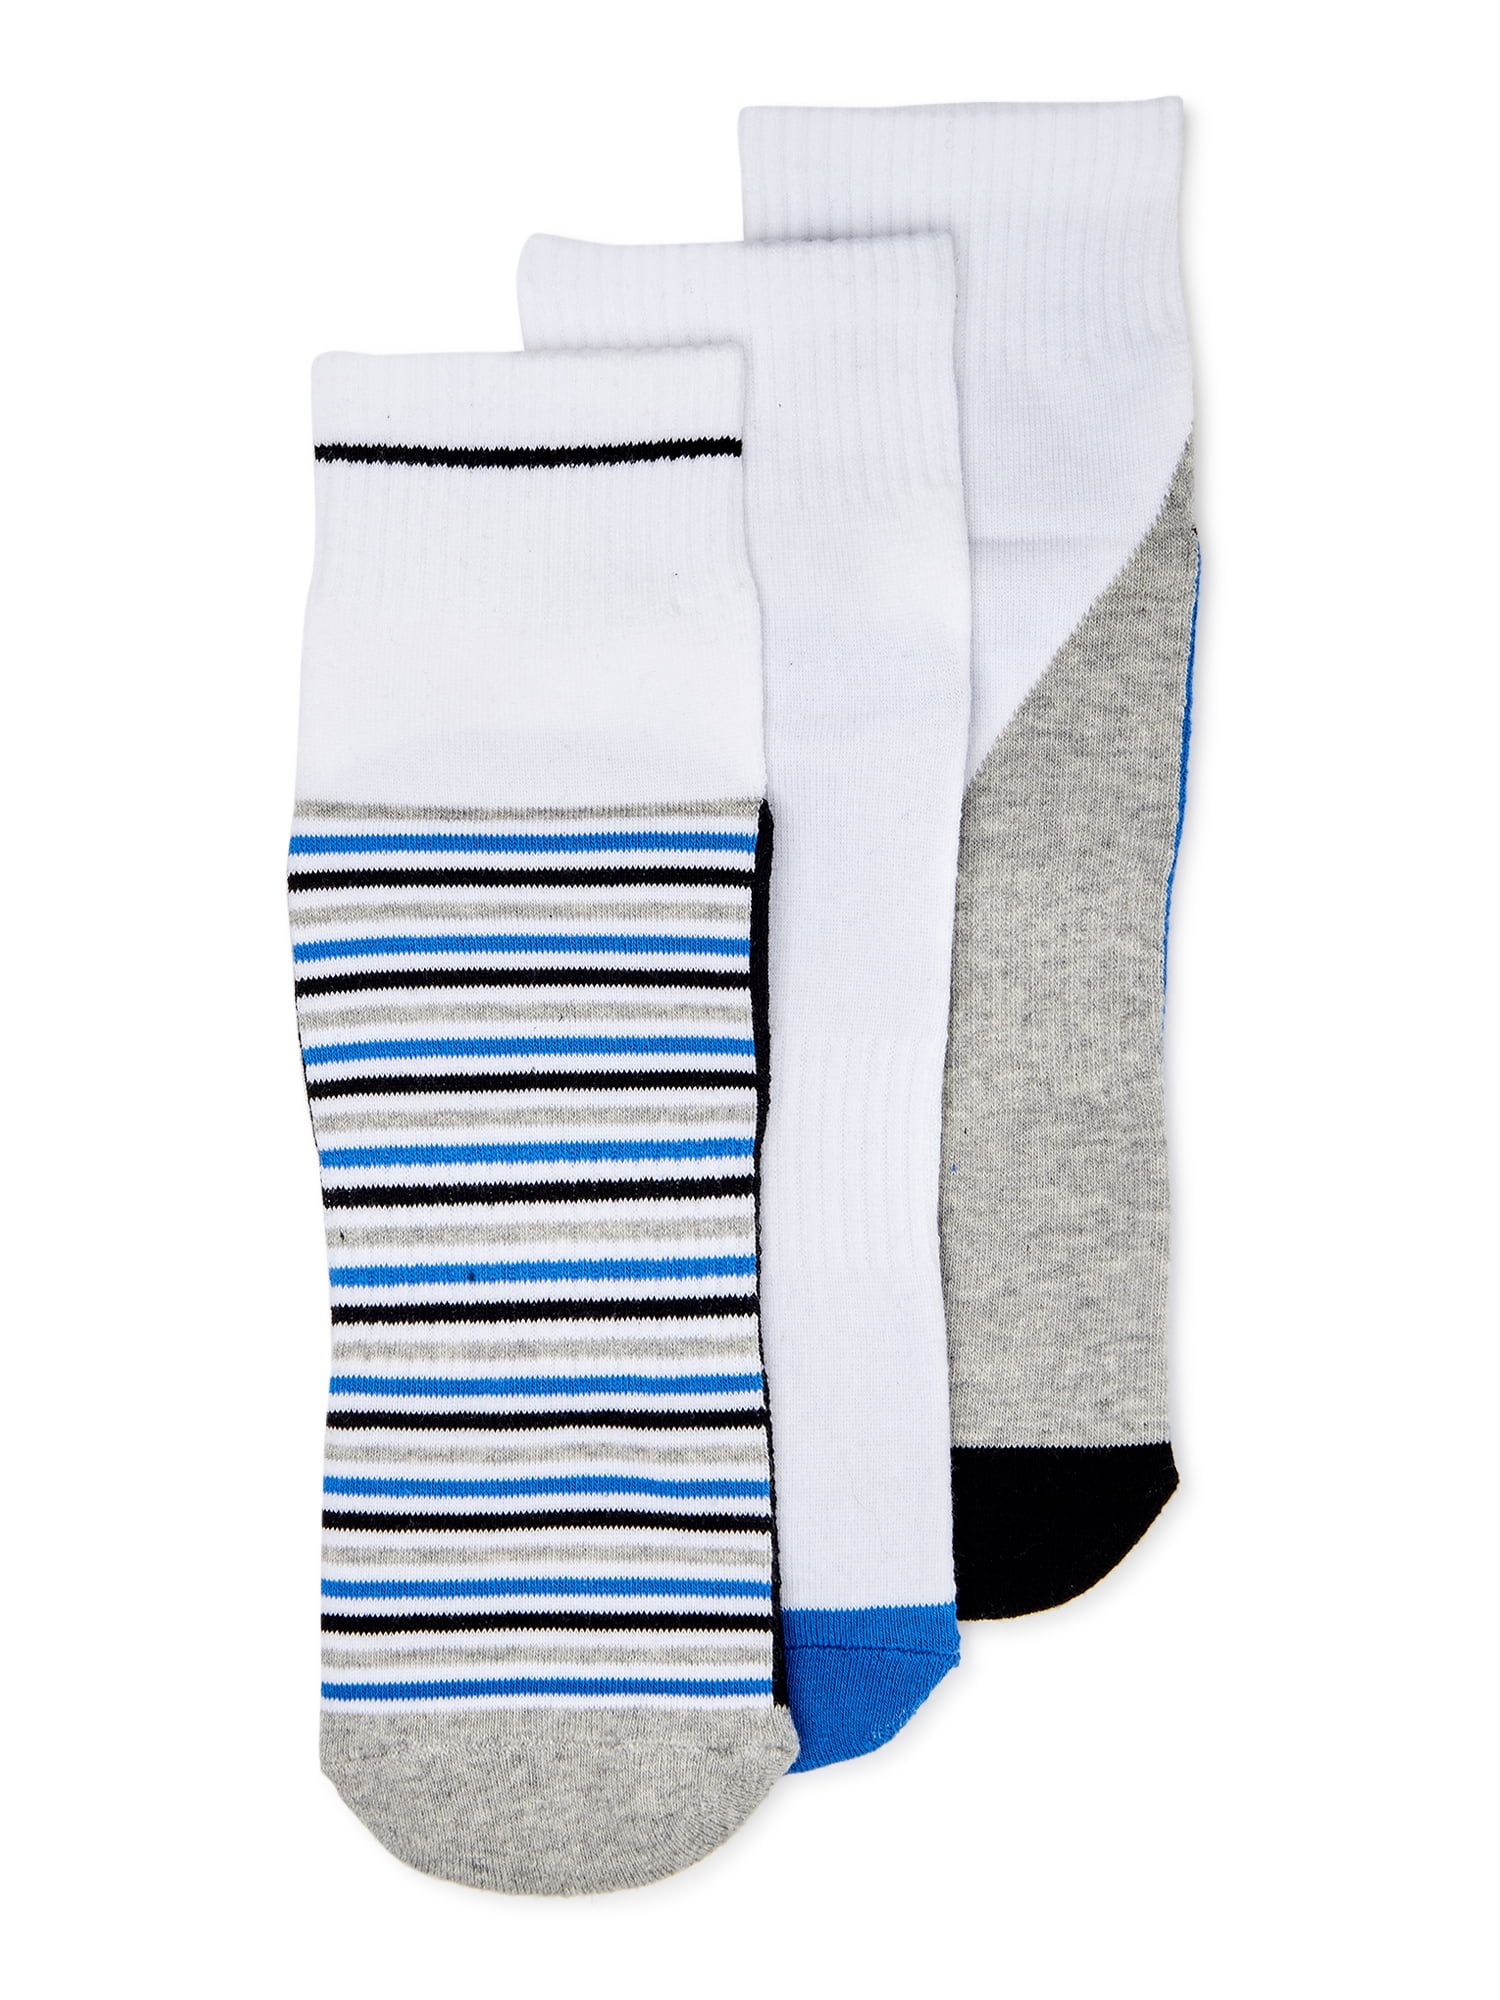 Pair of Thieves Ready For Everything Cushion Ankle Sock Men's 3-Pack